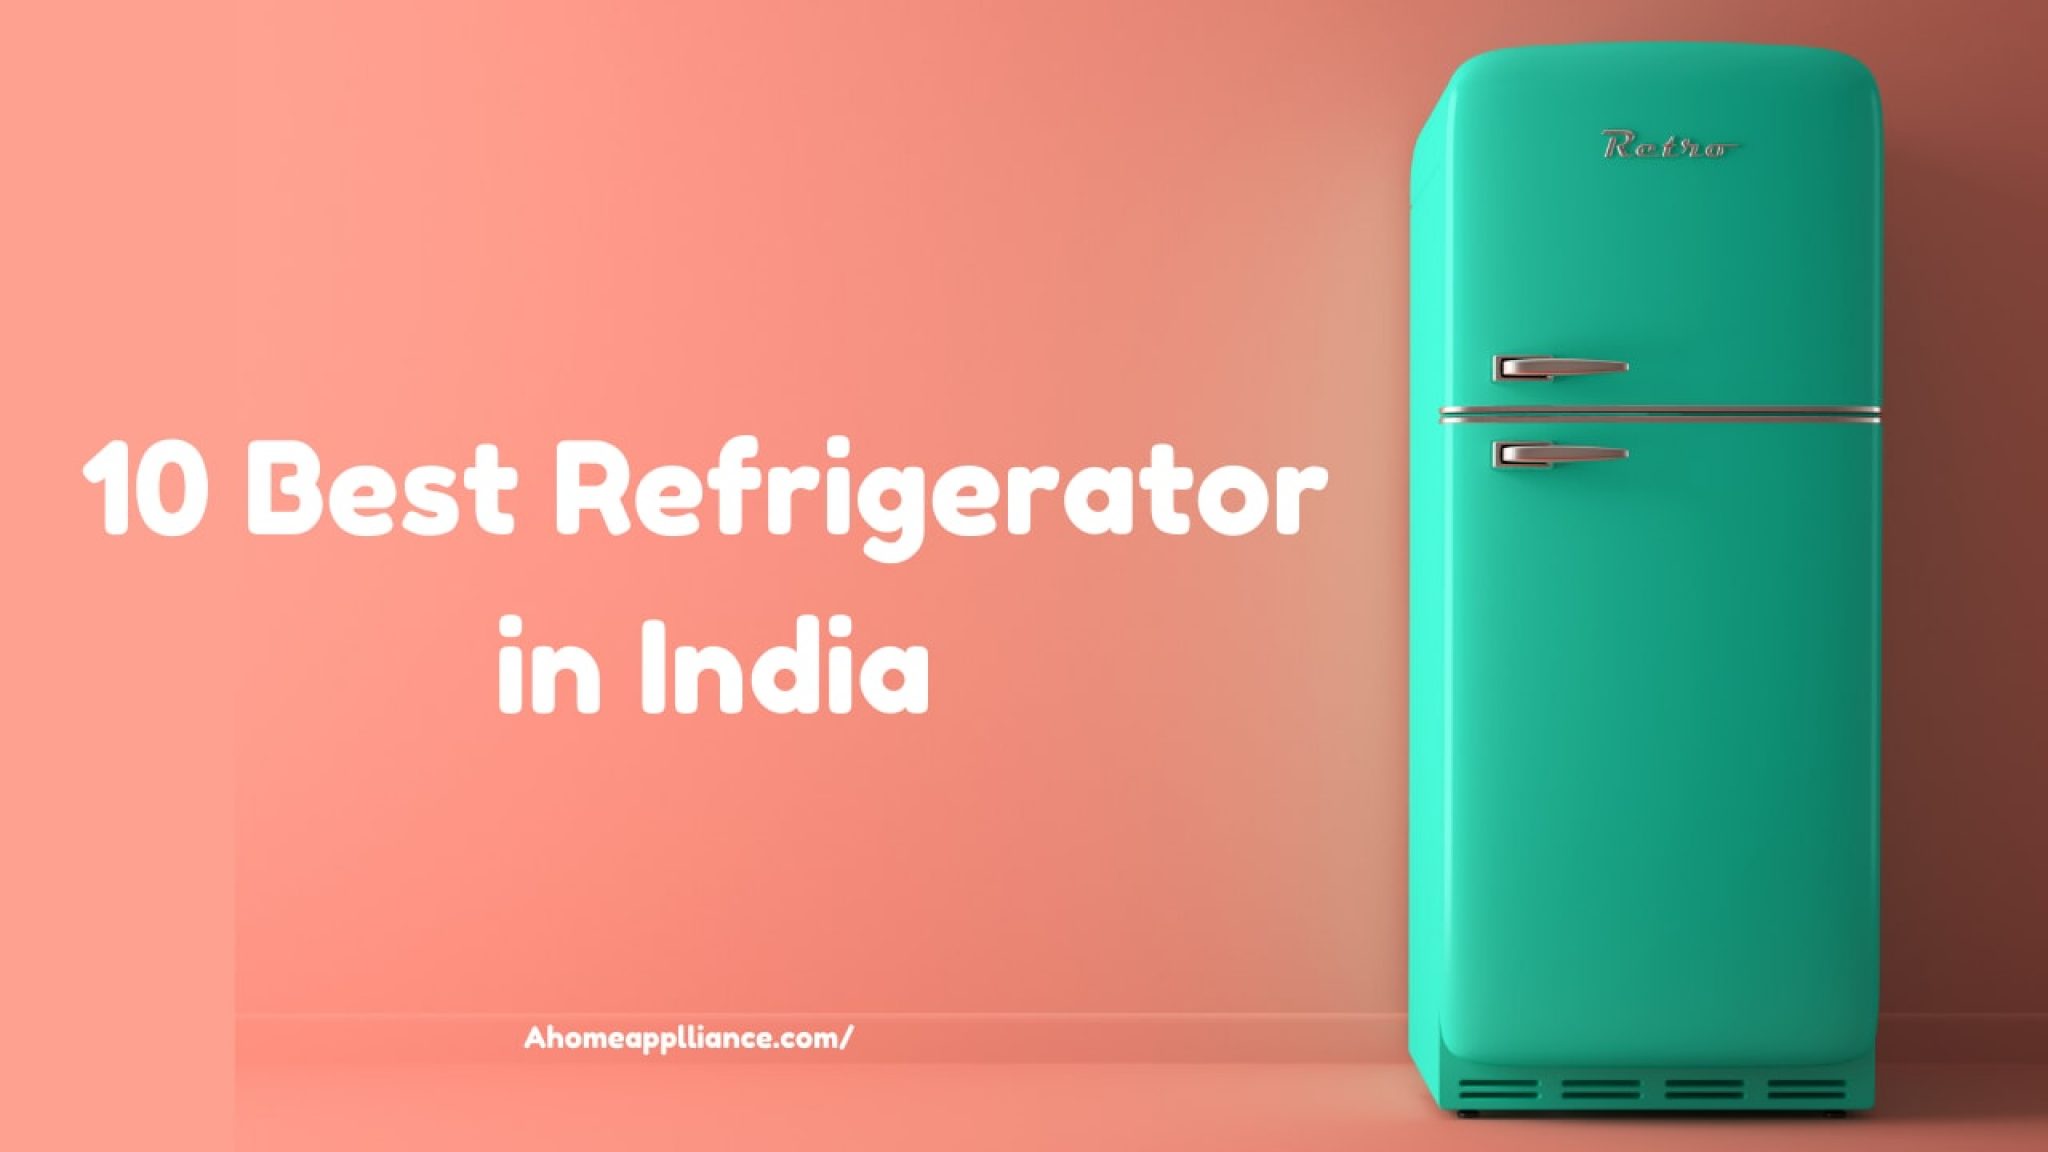 10 Best Refrigerator in India Review and Buying Guide